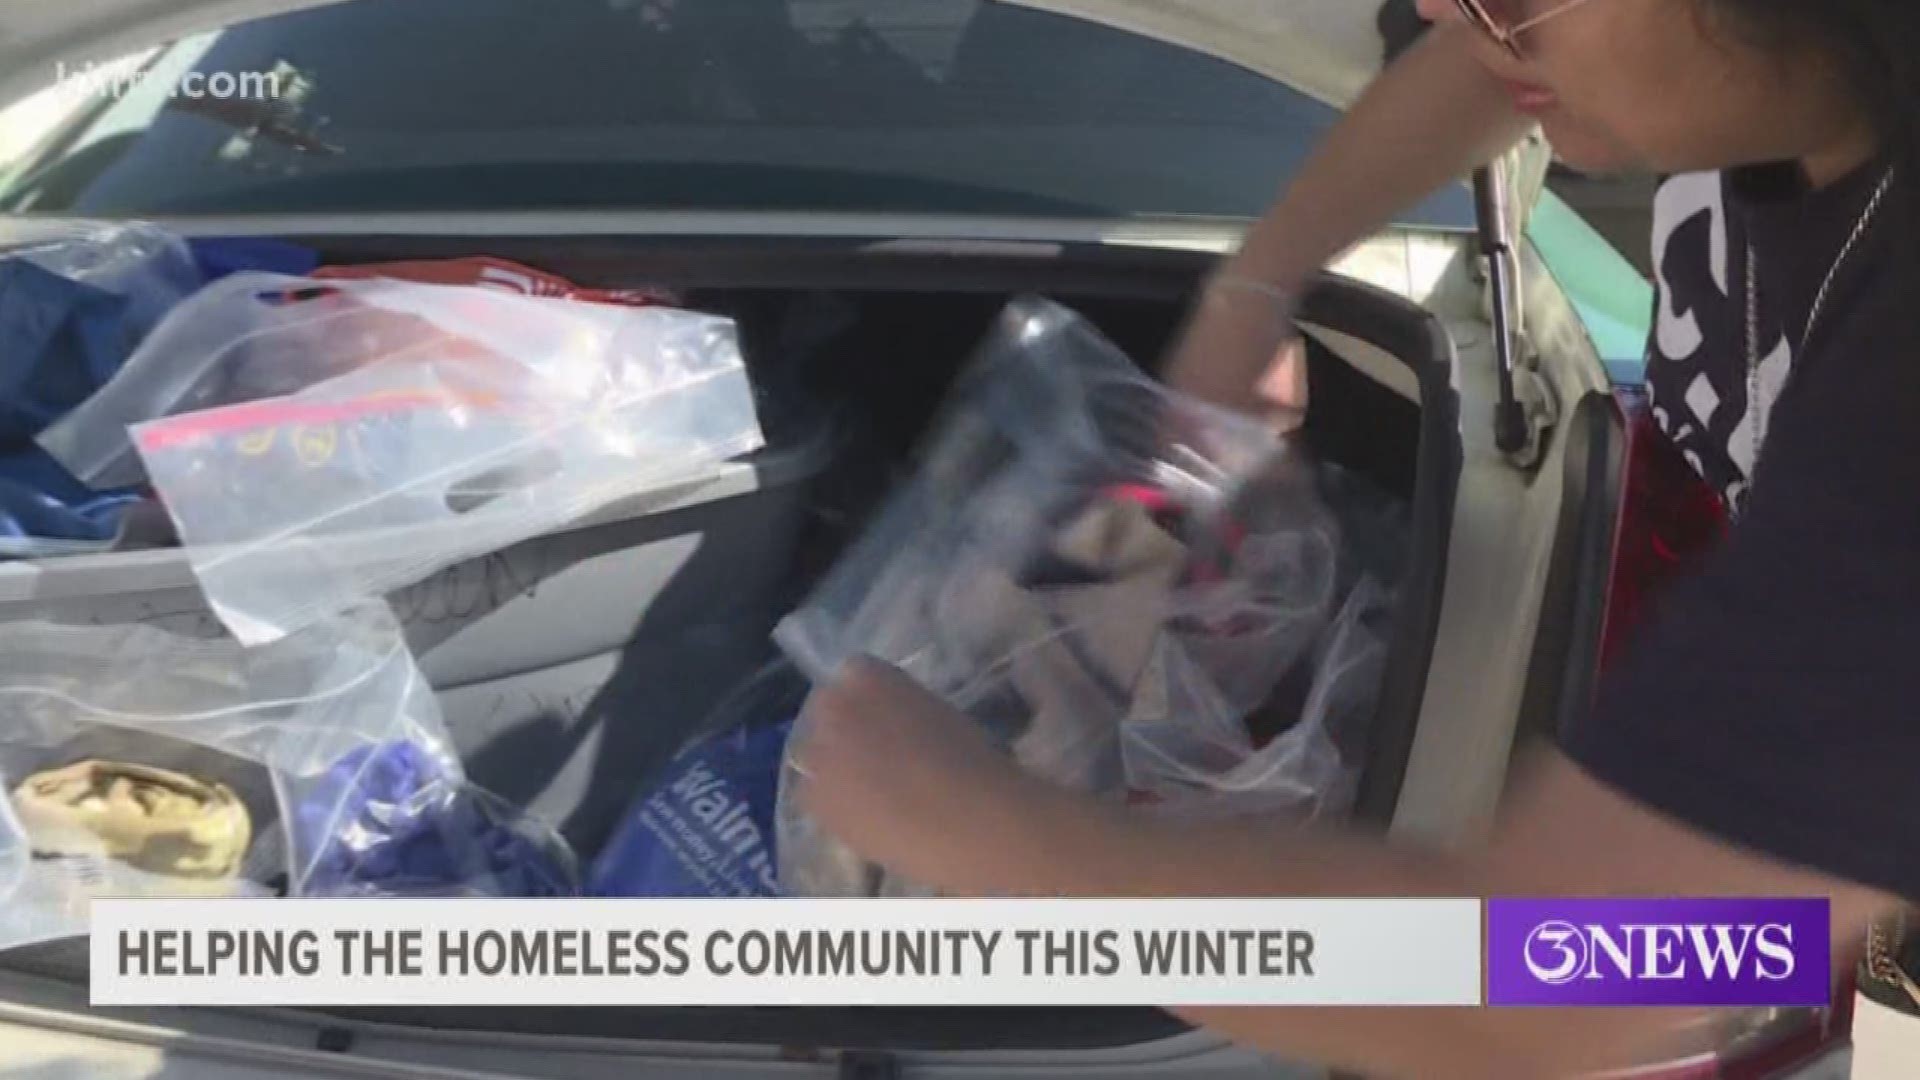 Christian Brothers Automotive and Chicas for Christ Outreach teamed up to collect winter clothing and blankets to hand out the homeless community on Tuesday.